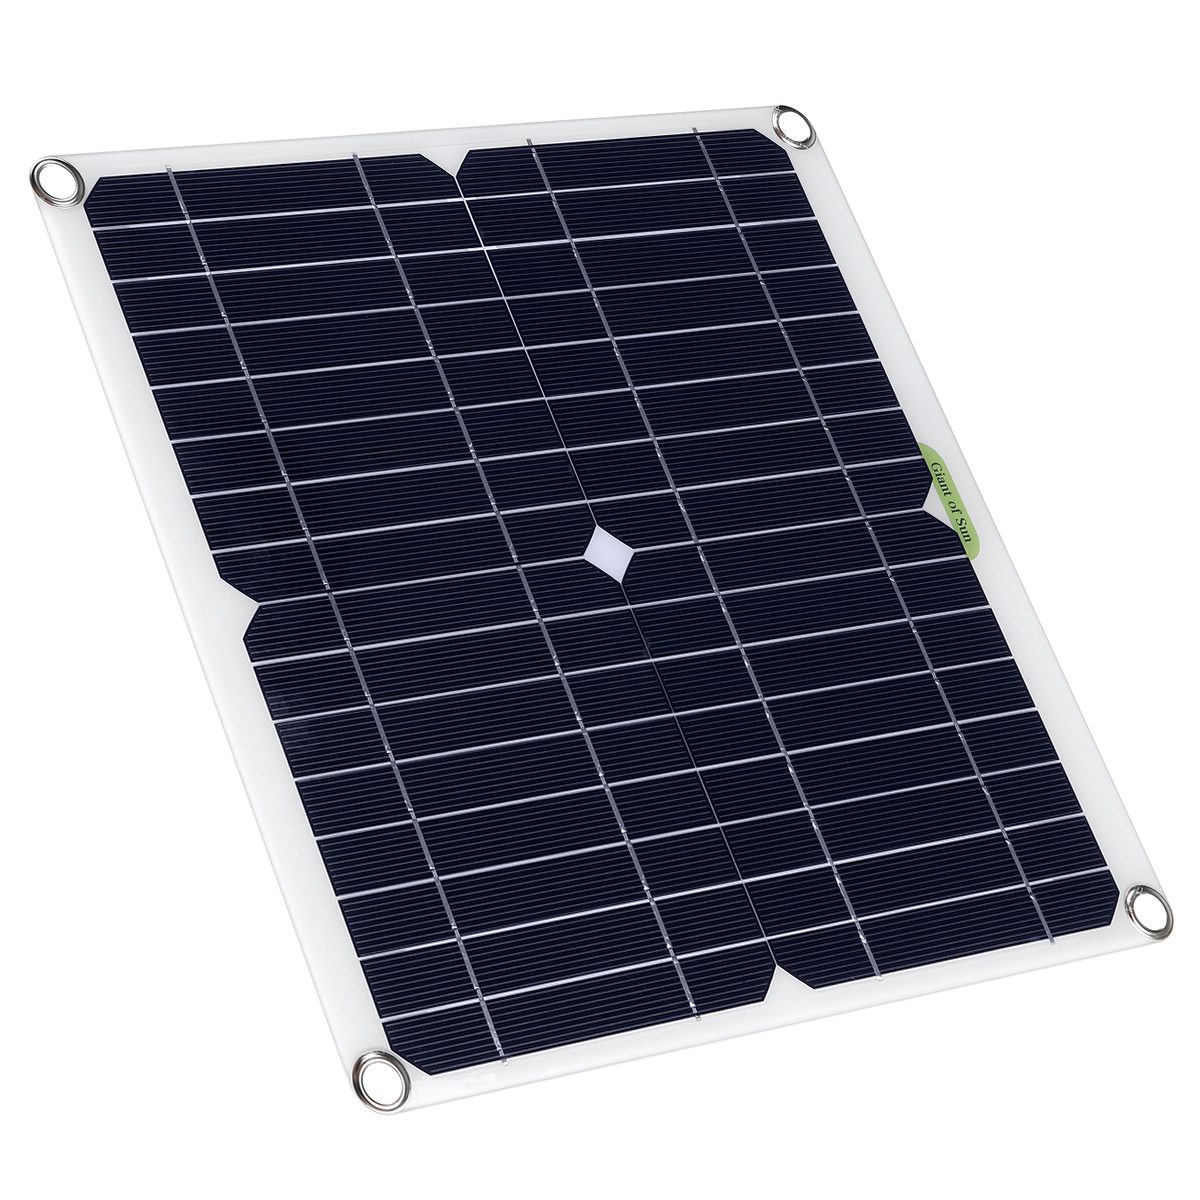 50W-Solar-Panel-Kit-18V-Battery-Charger-1020304050A-Controller-DCUSBTYPE-C-For-Outdoor-Camping-Acces-1780843-8